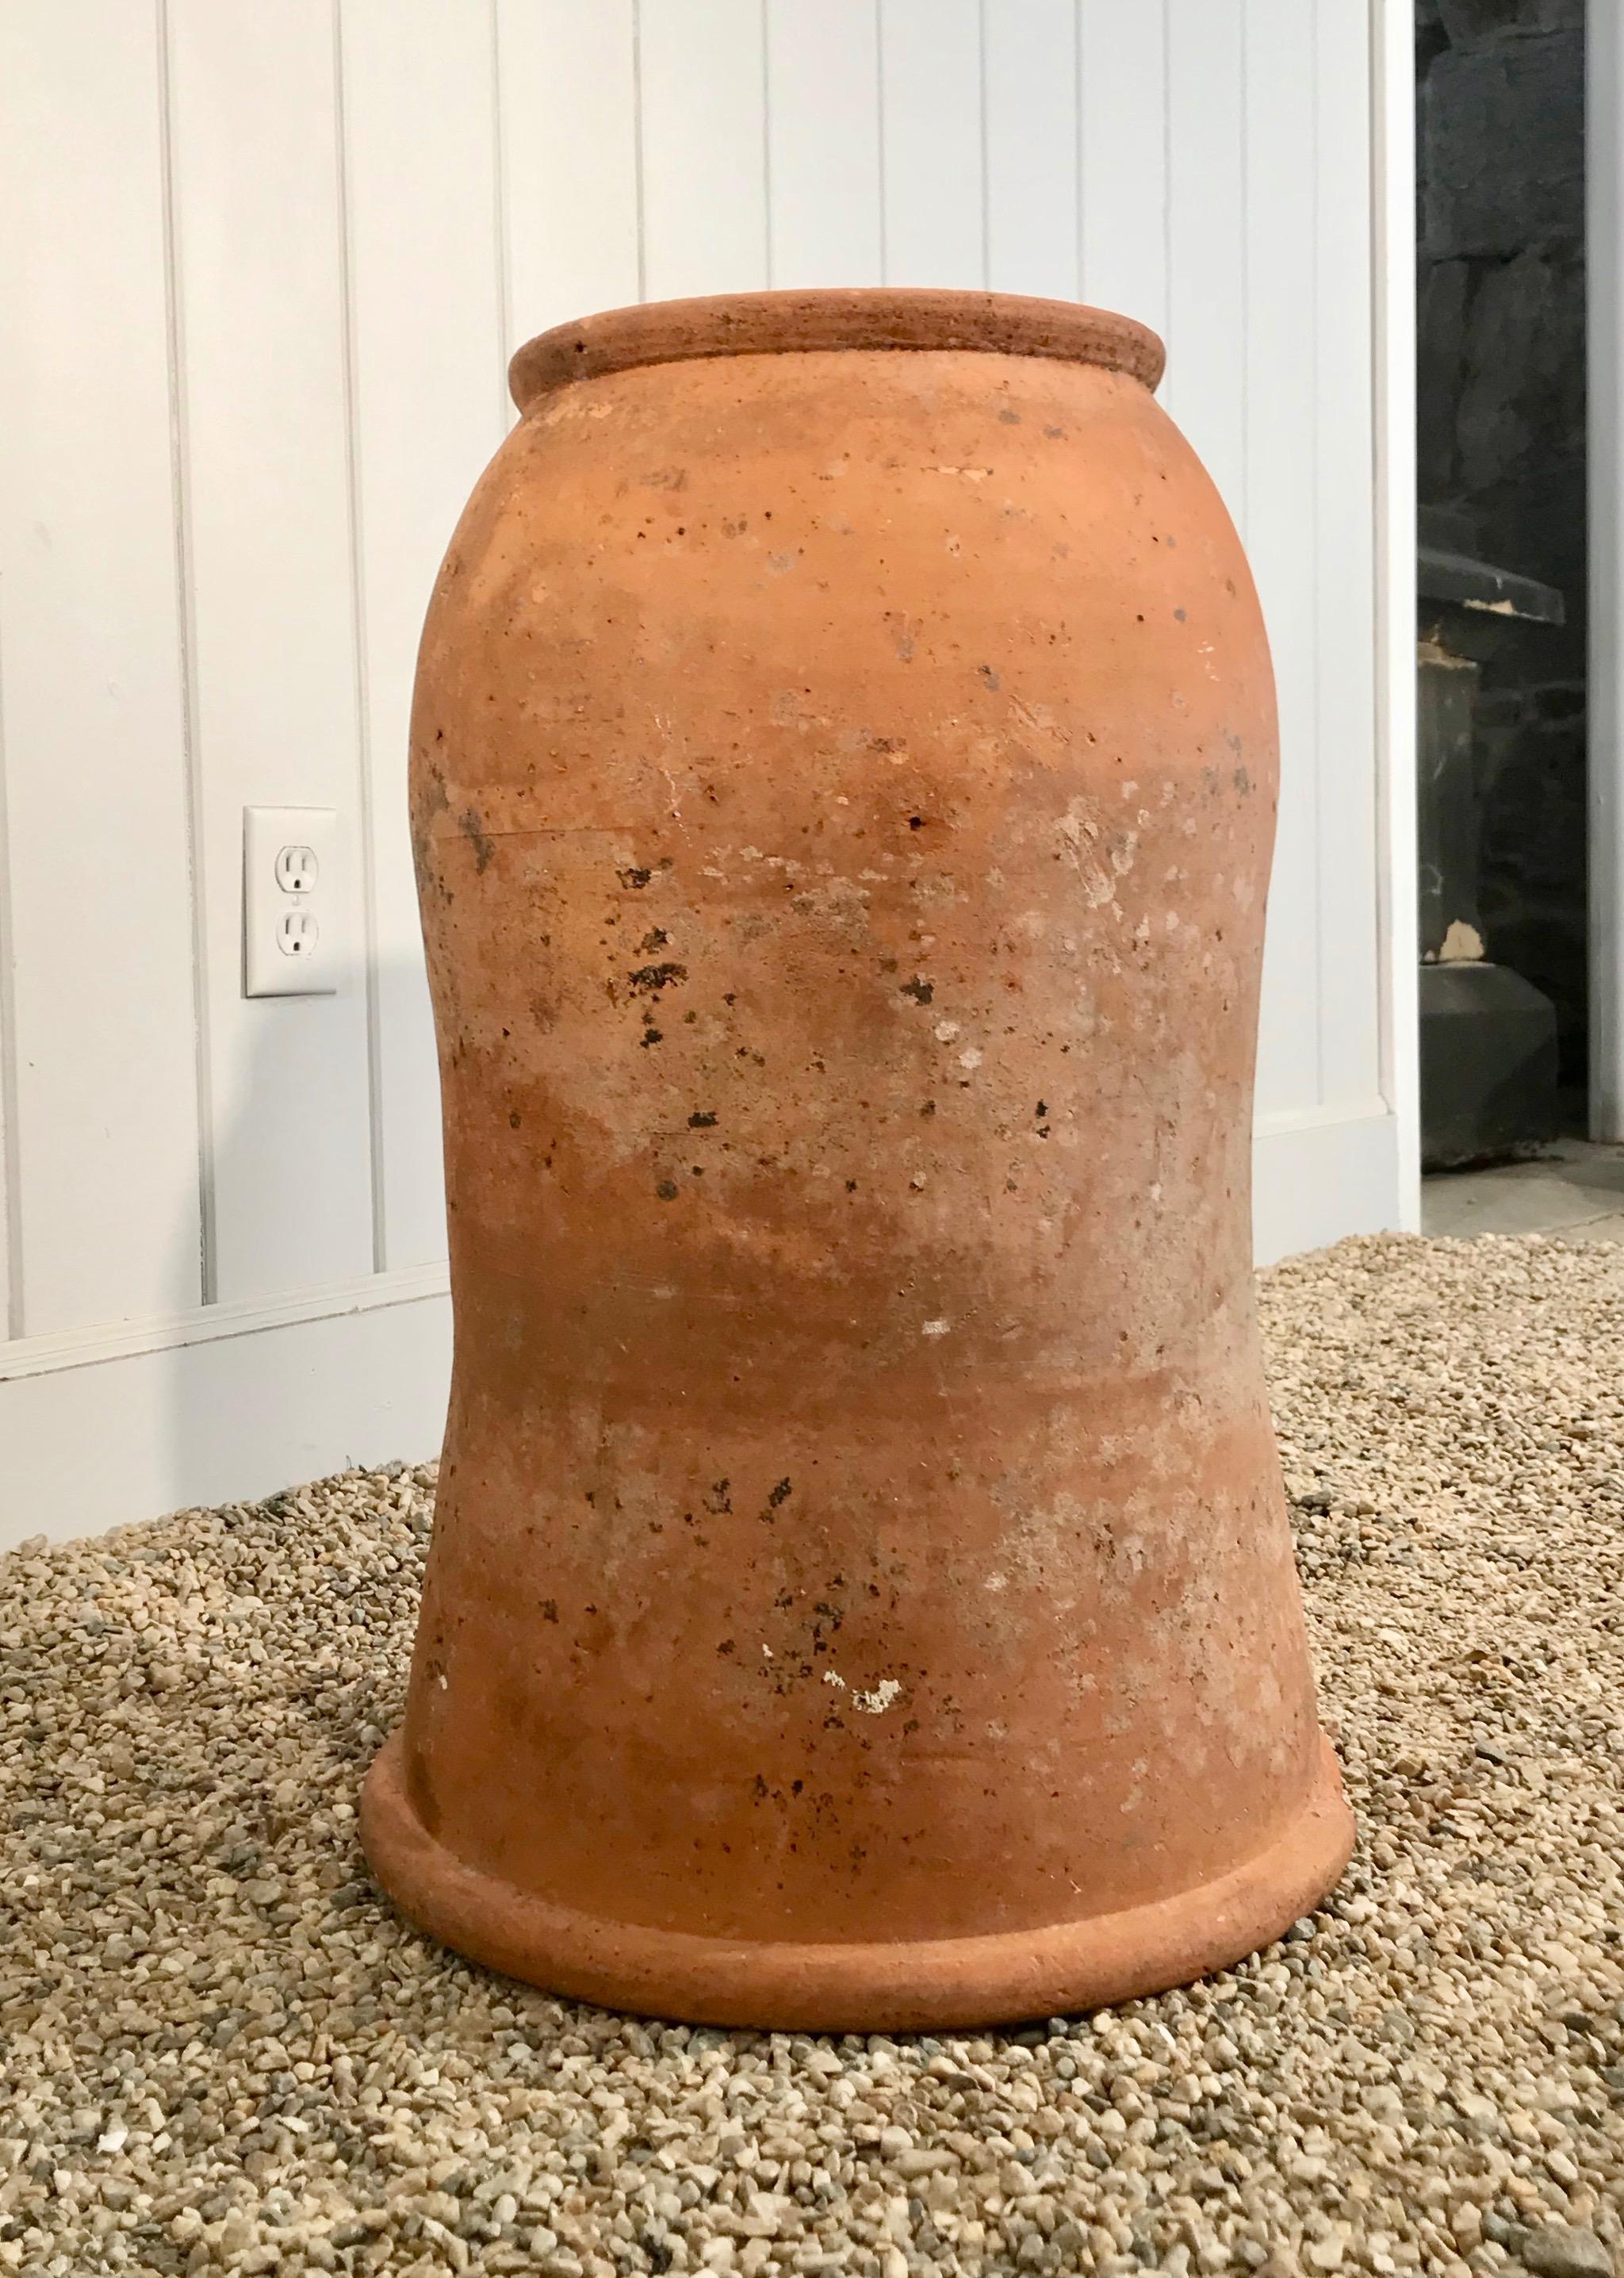 We love old English forcing pots and have three beauties, of which this is the largest. With a lovely scrolled neck and rim, and in very good condition (there is a minor rim chip, but no cracks), it would be lovely in a potager to protect your new